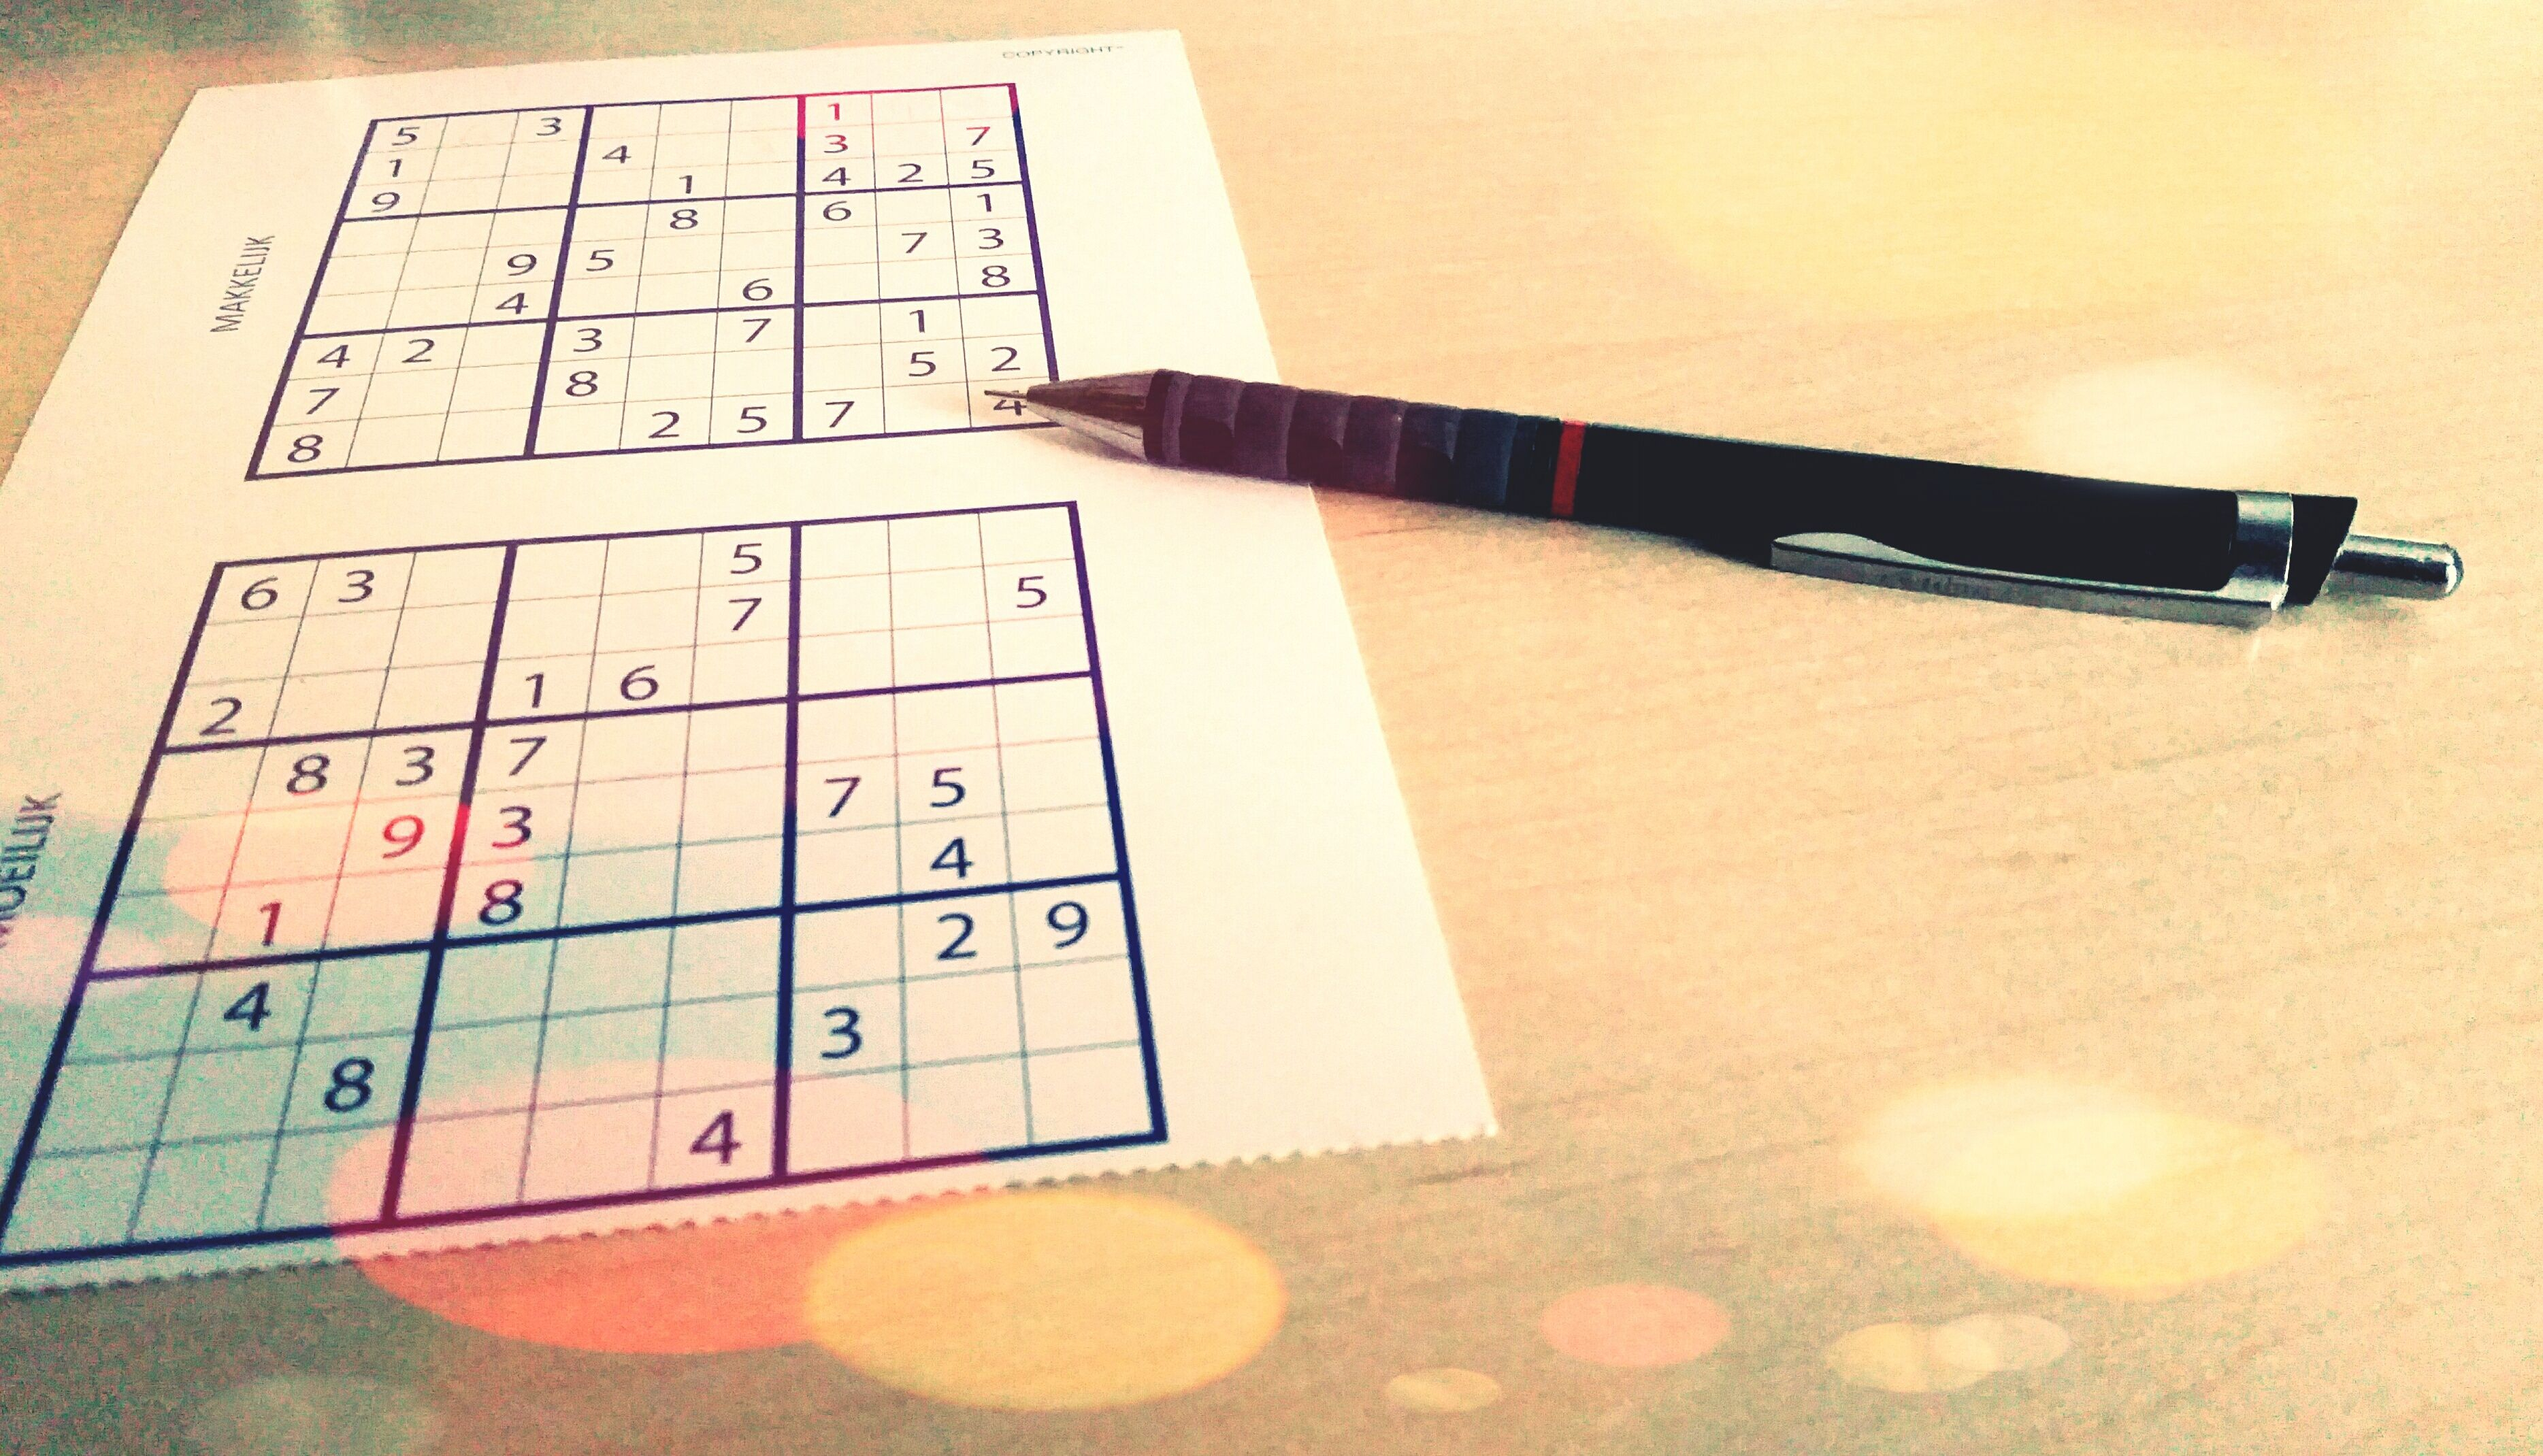 Free Printable Sudoku Puzzles For All Abilities - Free Printable Super Challenger Sudoku